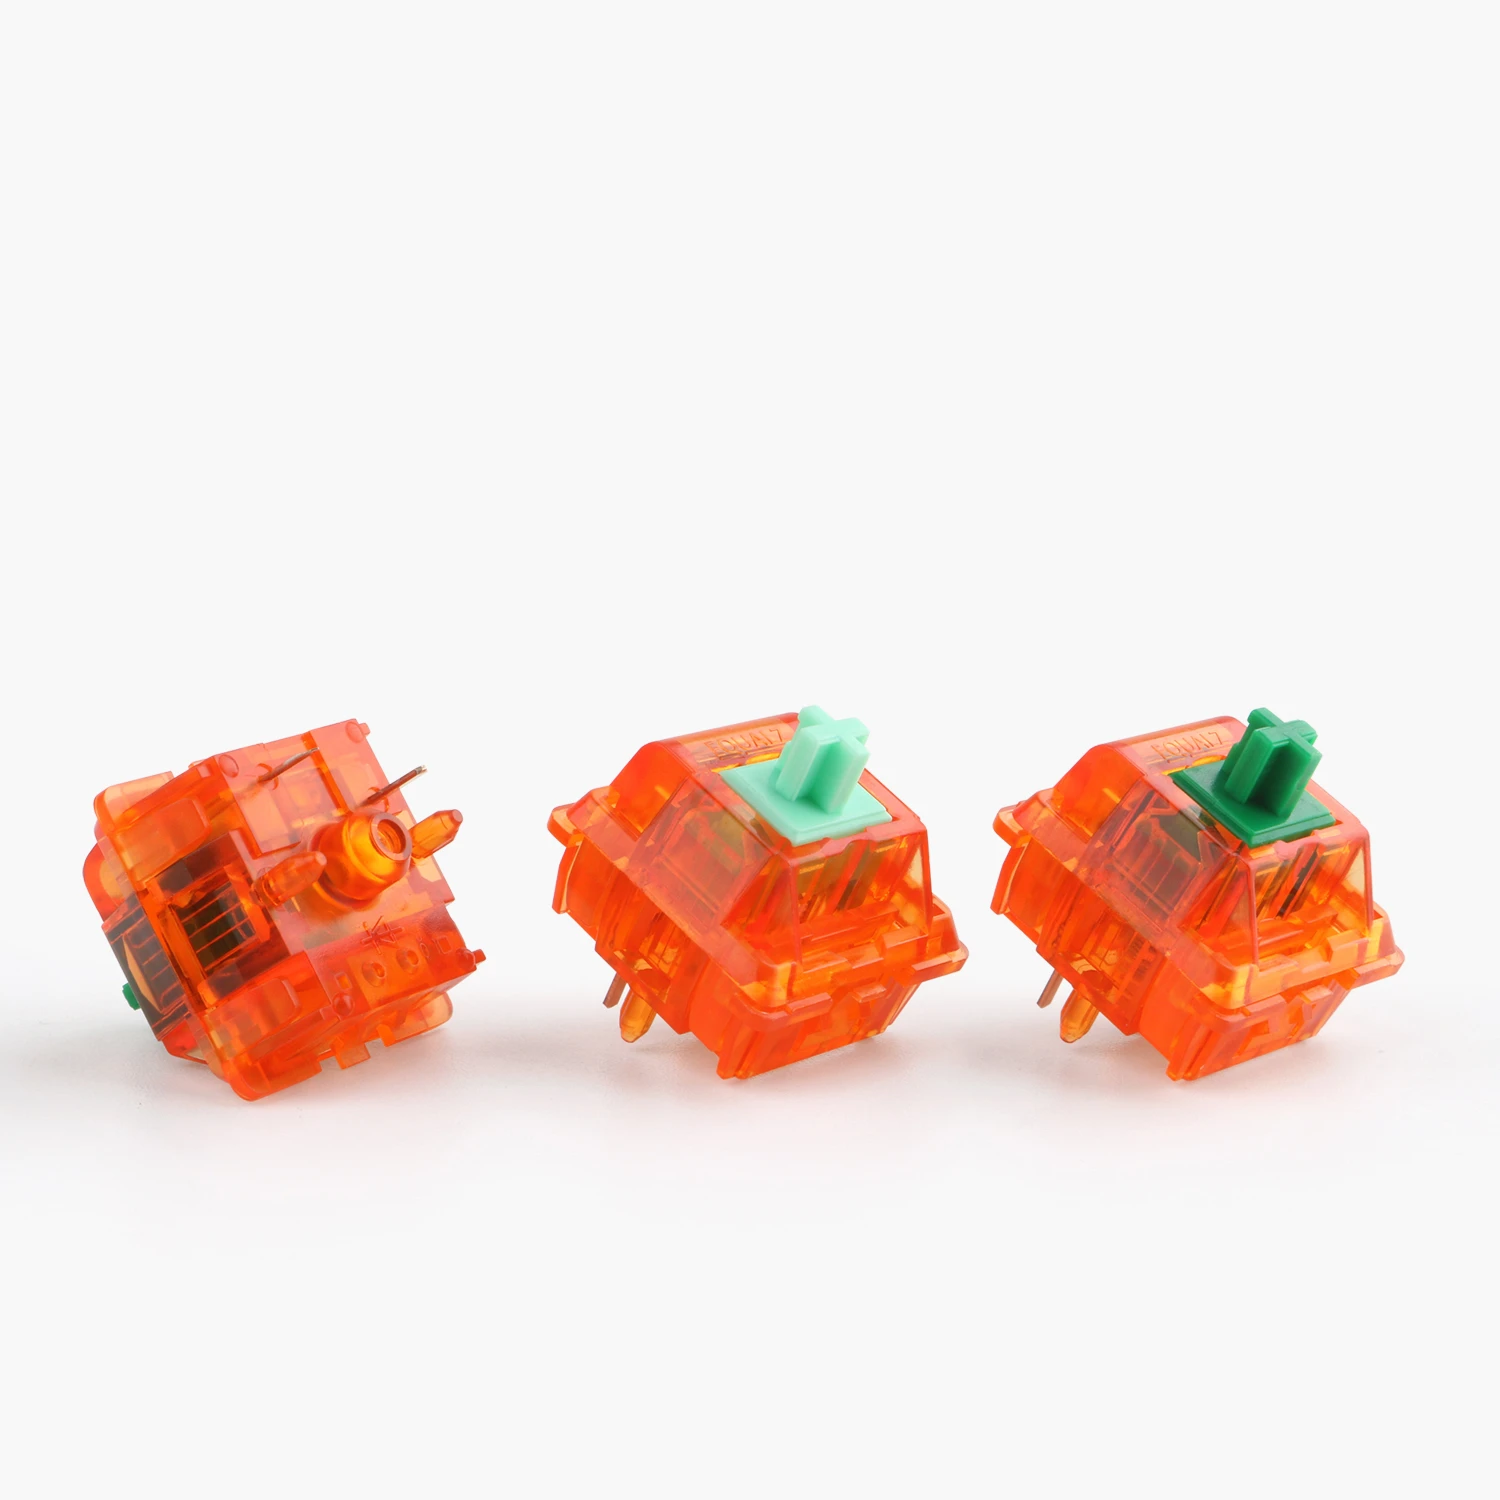 

EQUALZ Tangerine V2 5 Pin Switches for Mechanical Keyboard 62g 67g Translucent Linear Axis Customize DIY Mechanical Keyboard